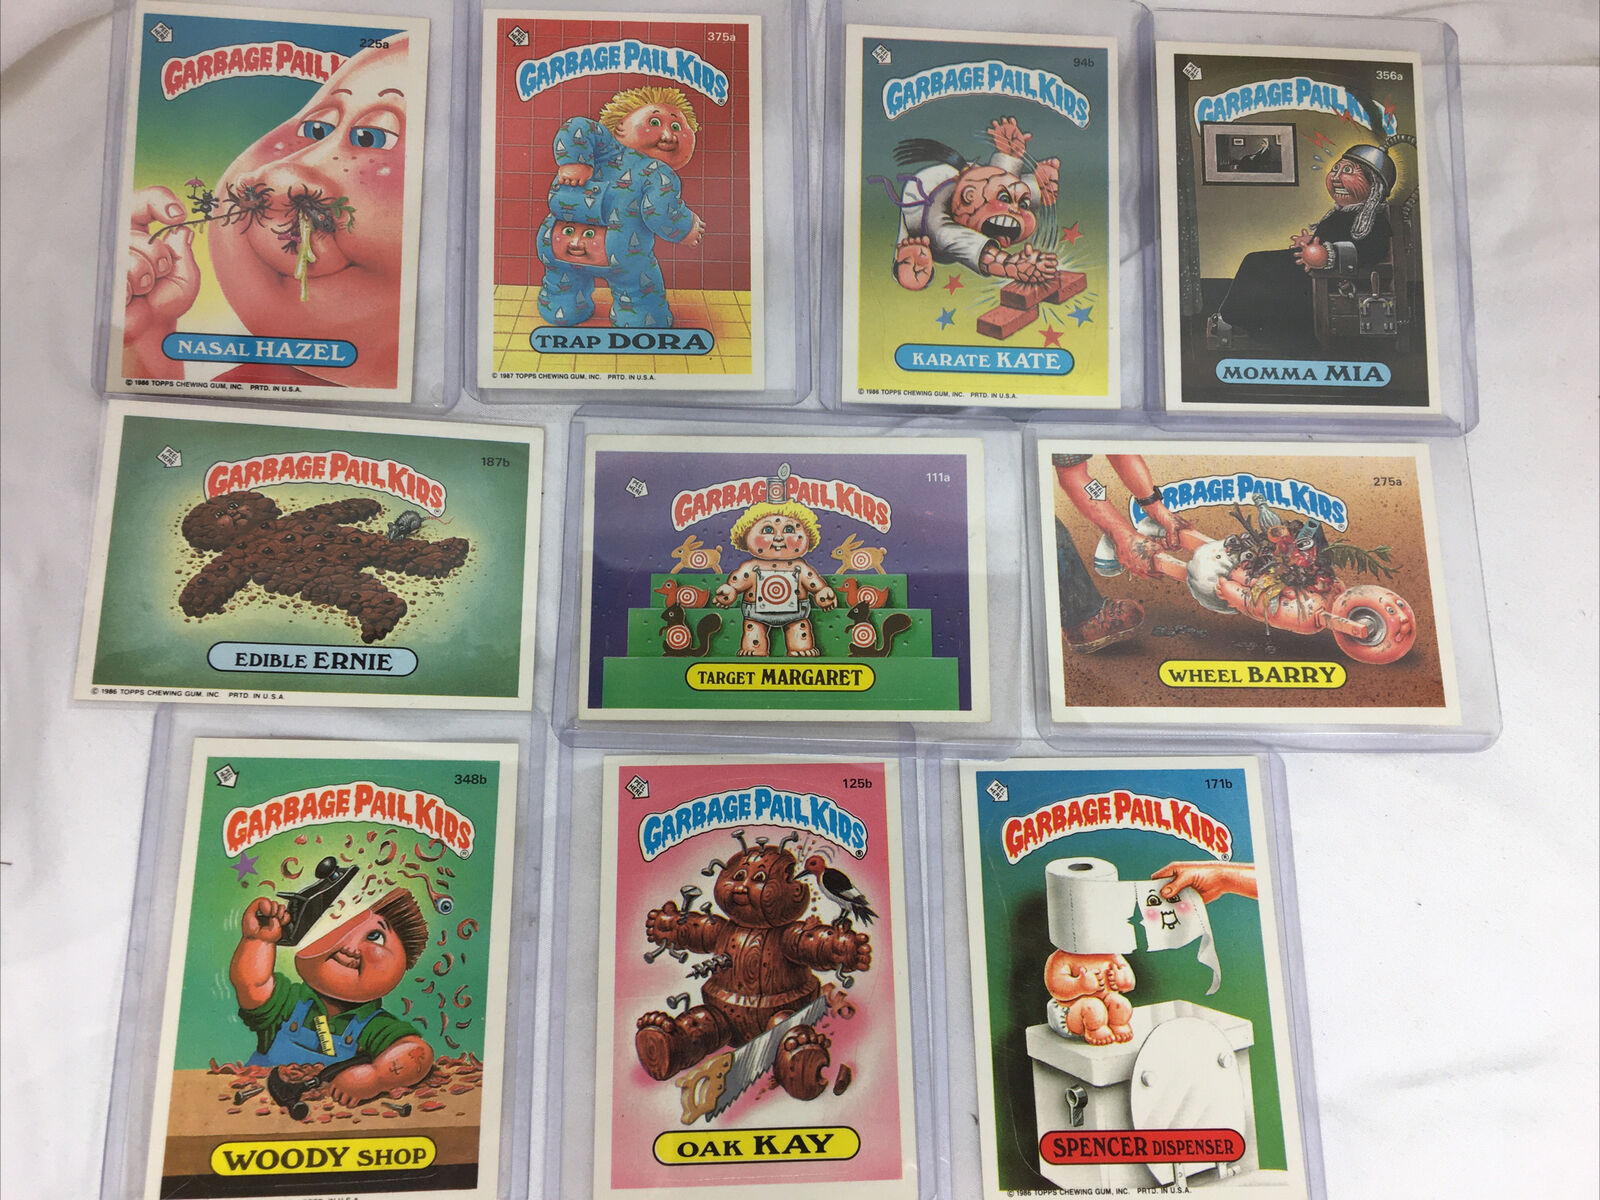 GARBAGE PAIL KIDS CARDS / STICKERS LOT OF 10 RARE VINTAGE CARDS Lot #7